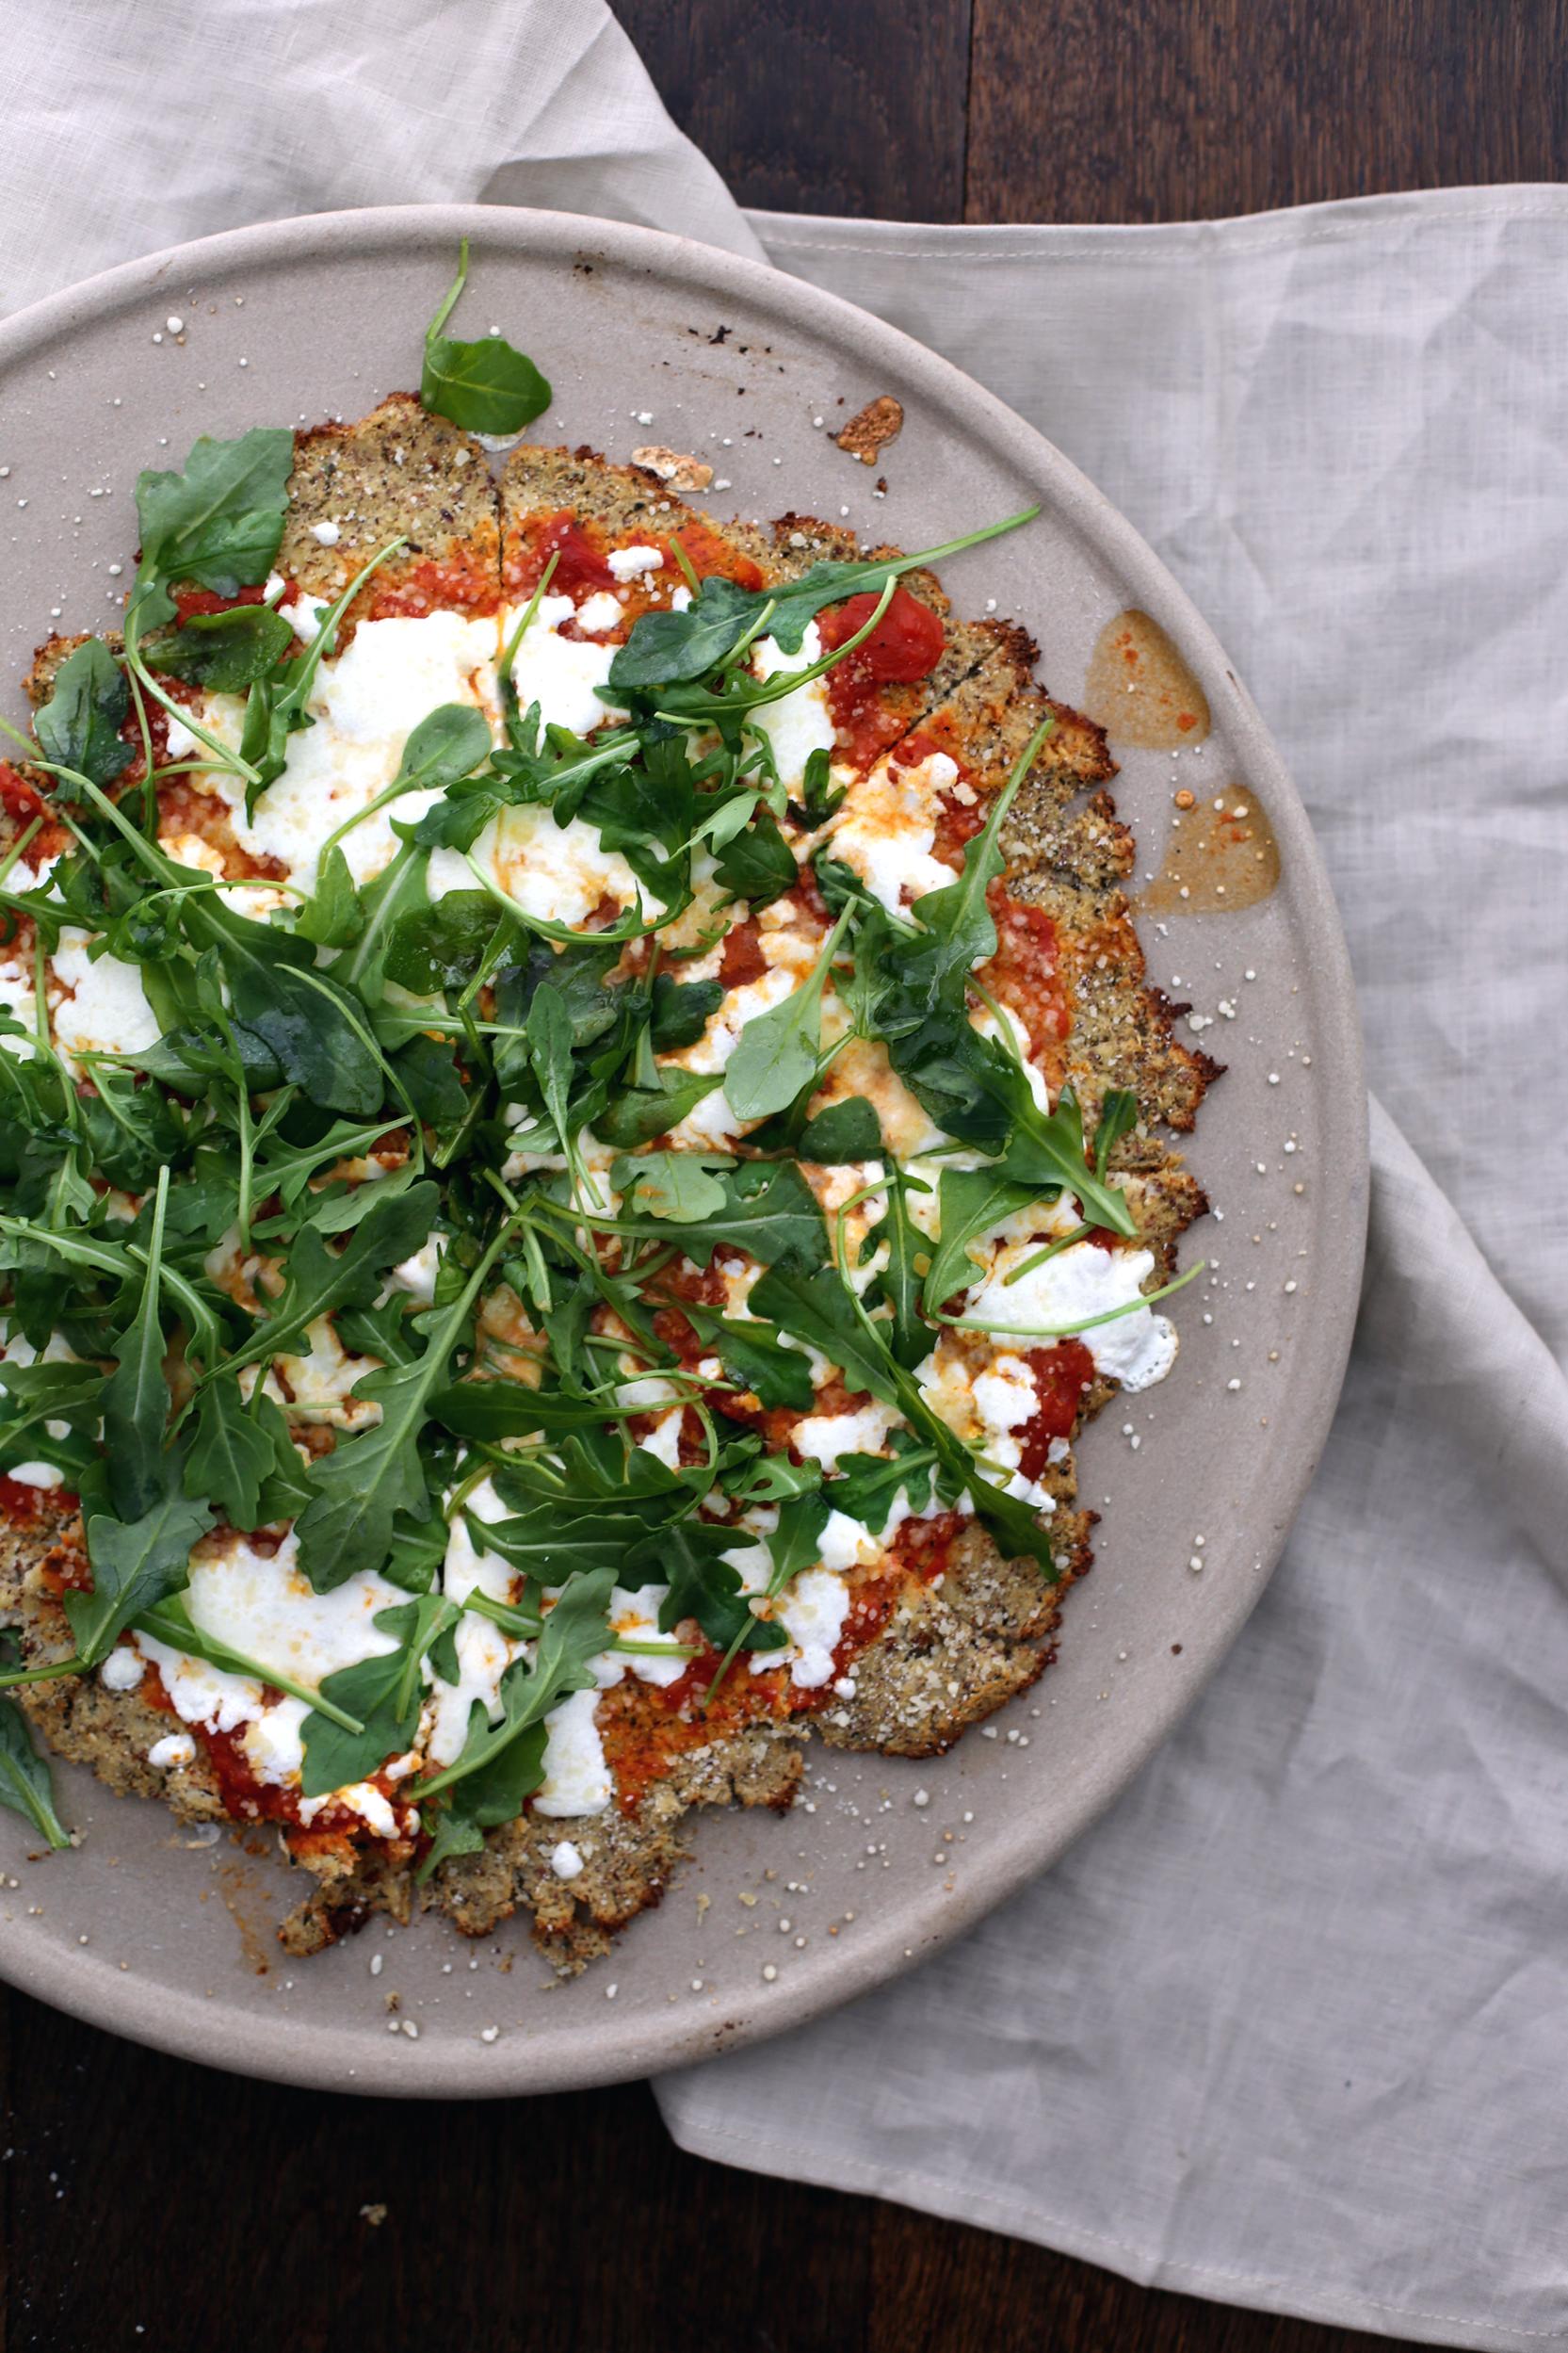  Satisfy your pizza cravings guilt-free with this recipe